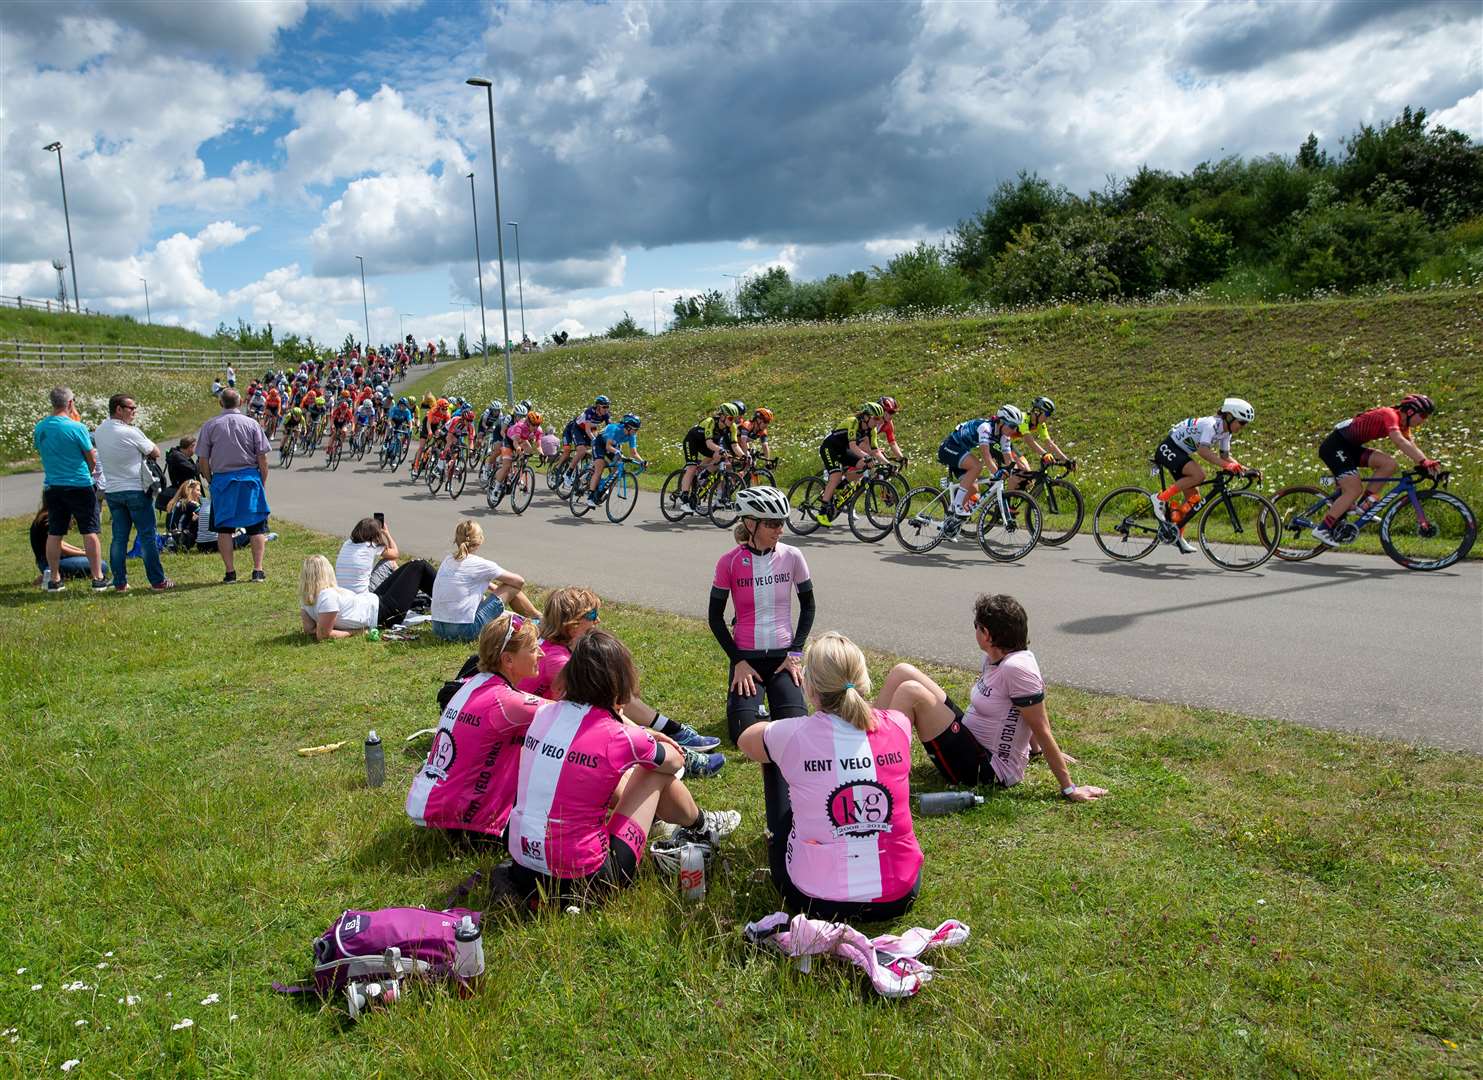 The women's Tour of Britain was held at Cyclopark in 2019